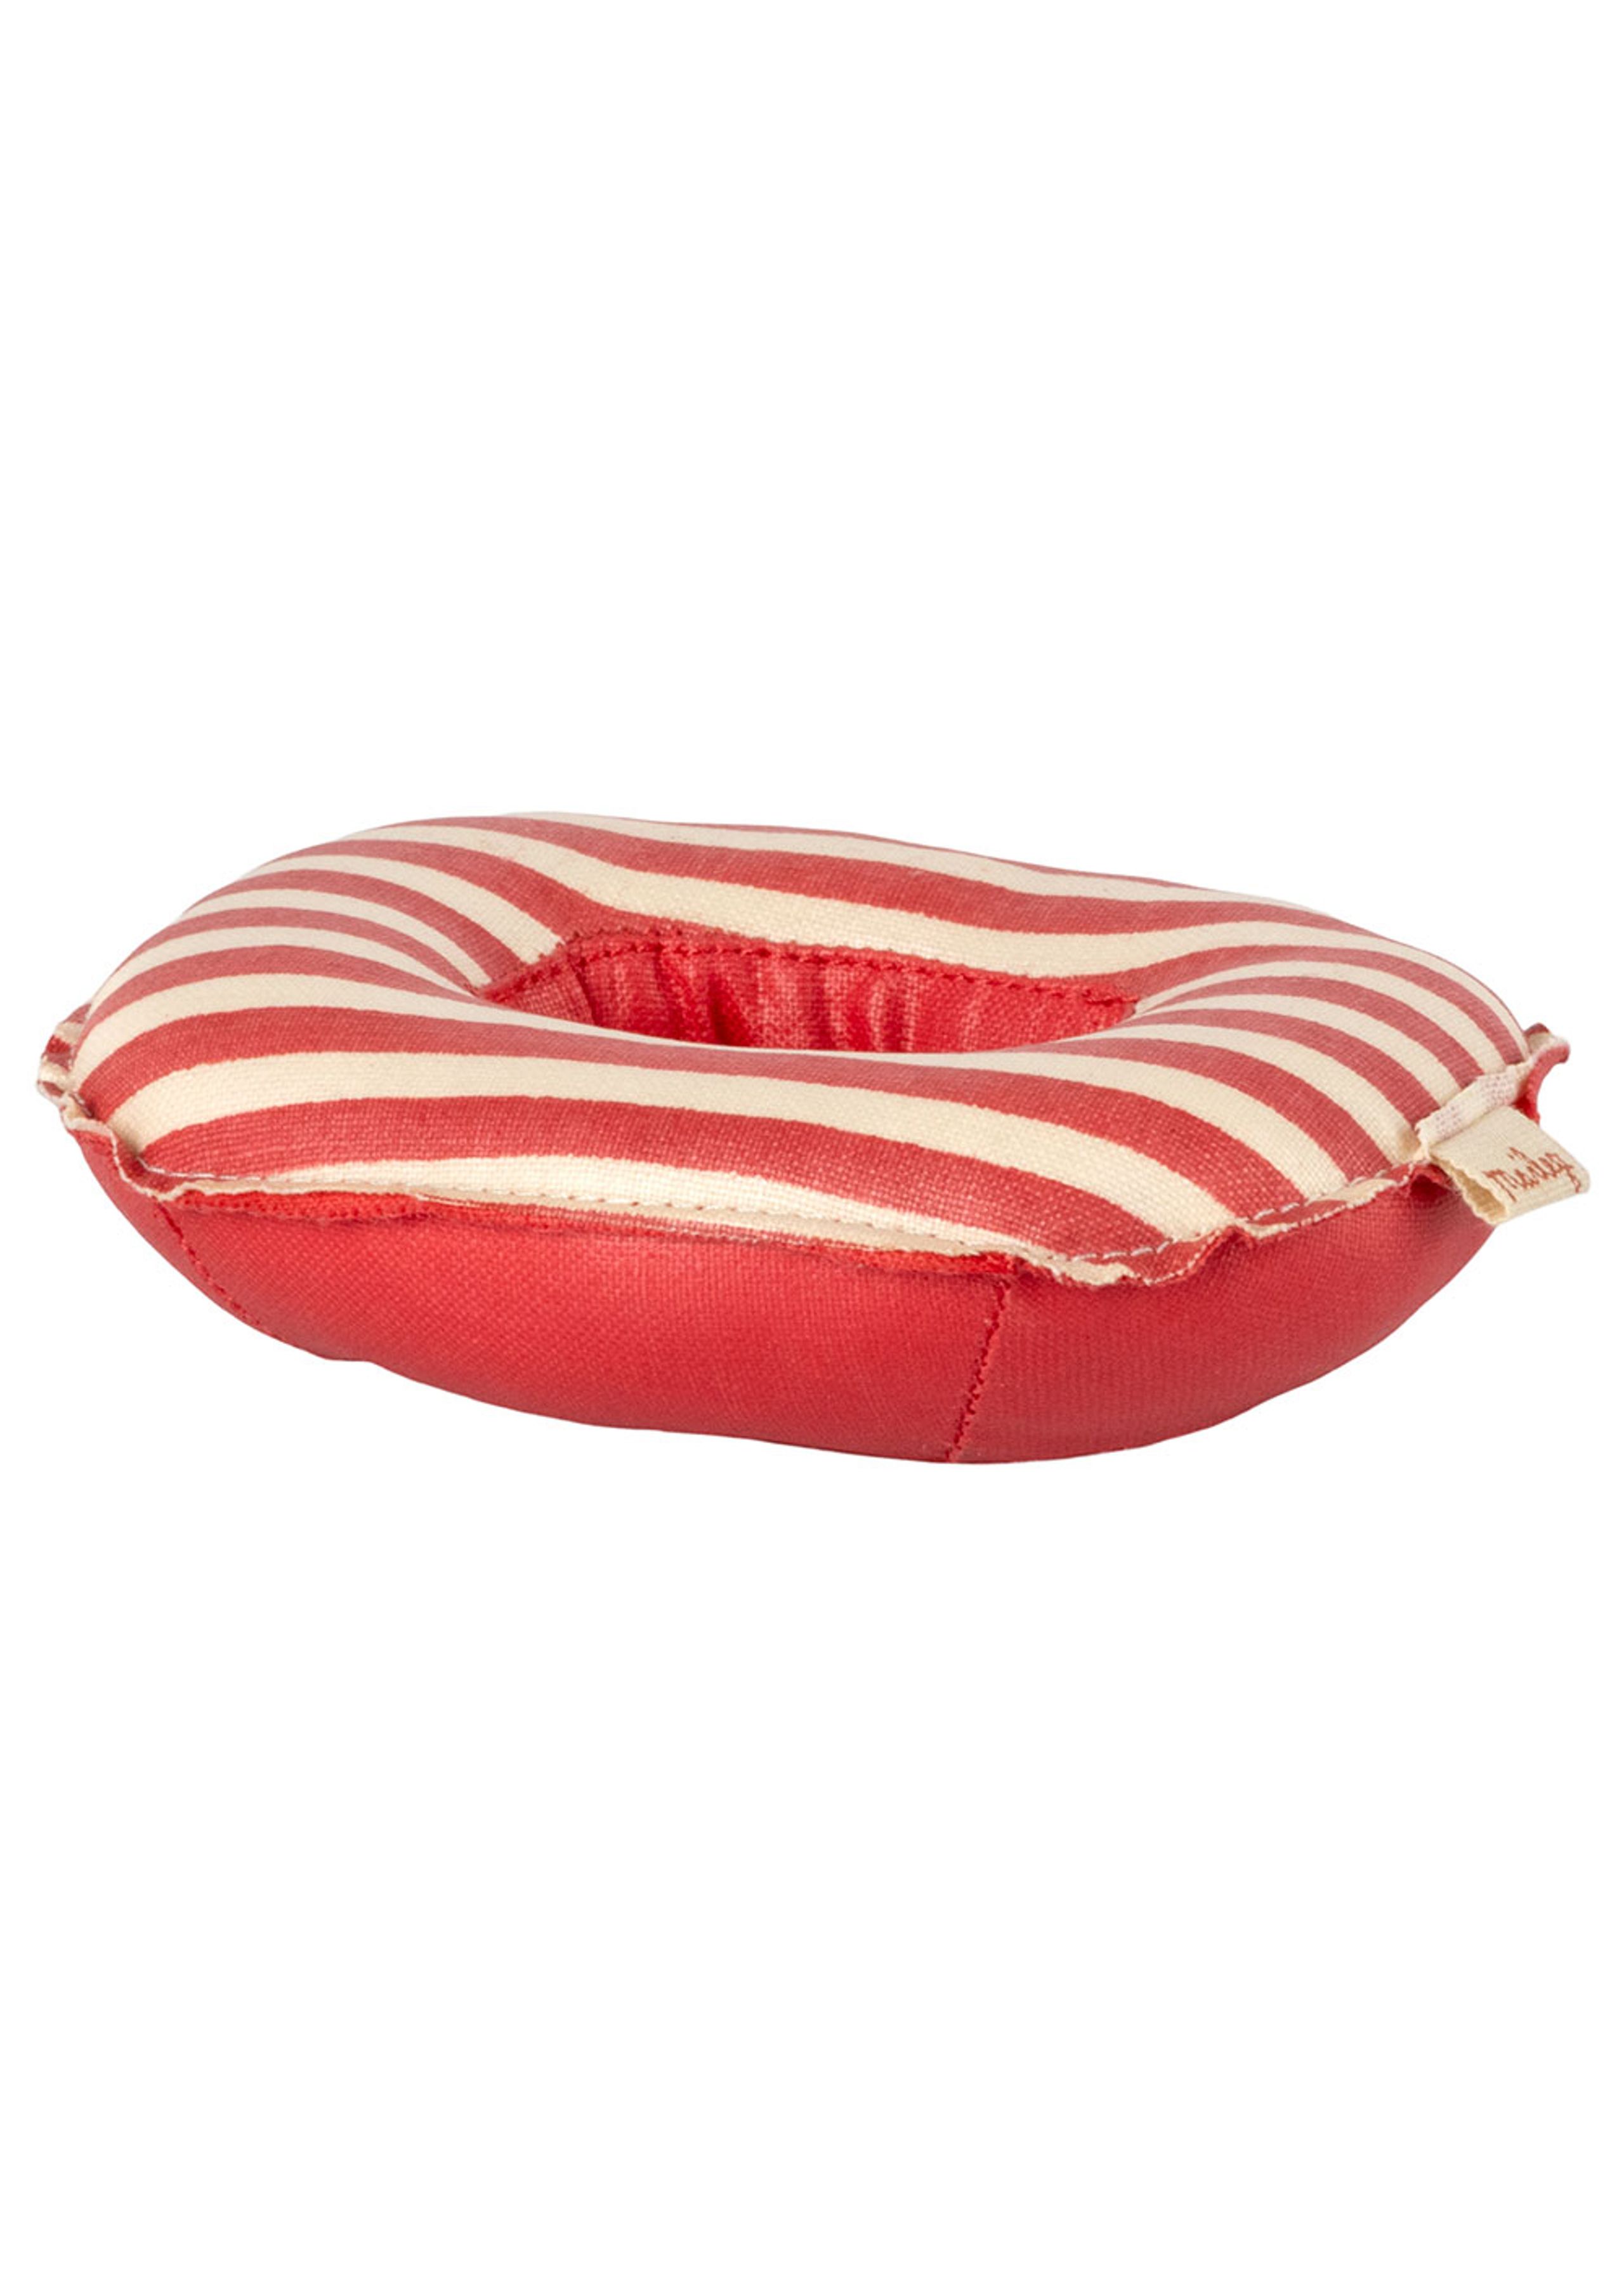 Maileg - Spielzeug - Rubber Boat - Red/White